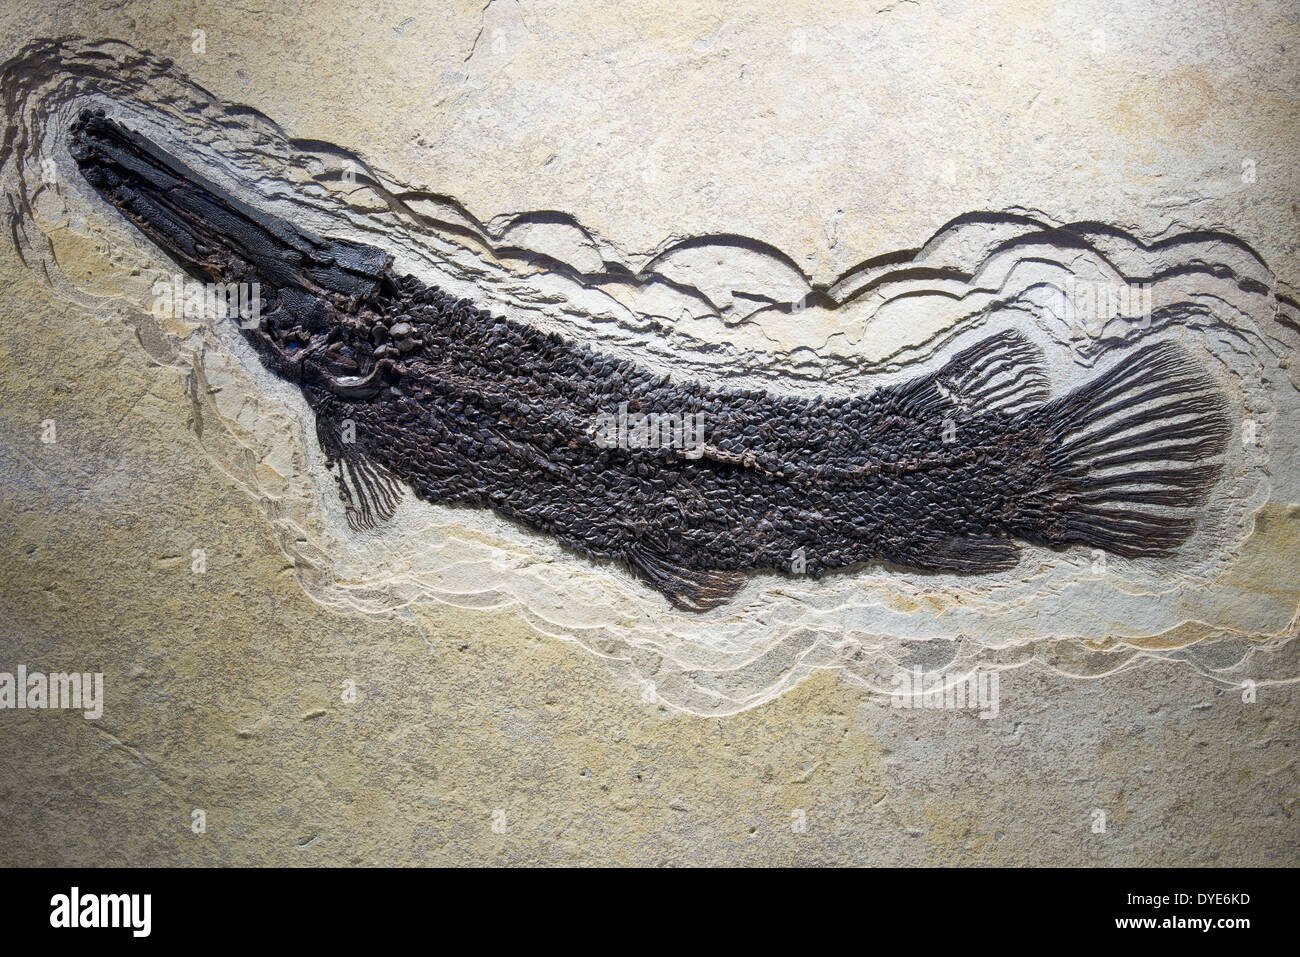 Fossil Alligator Gar fish (Atractosteus) with well preserved scales. Green River Formation, Wyoming. Eocene age. Stock Photo